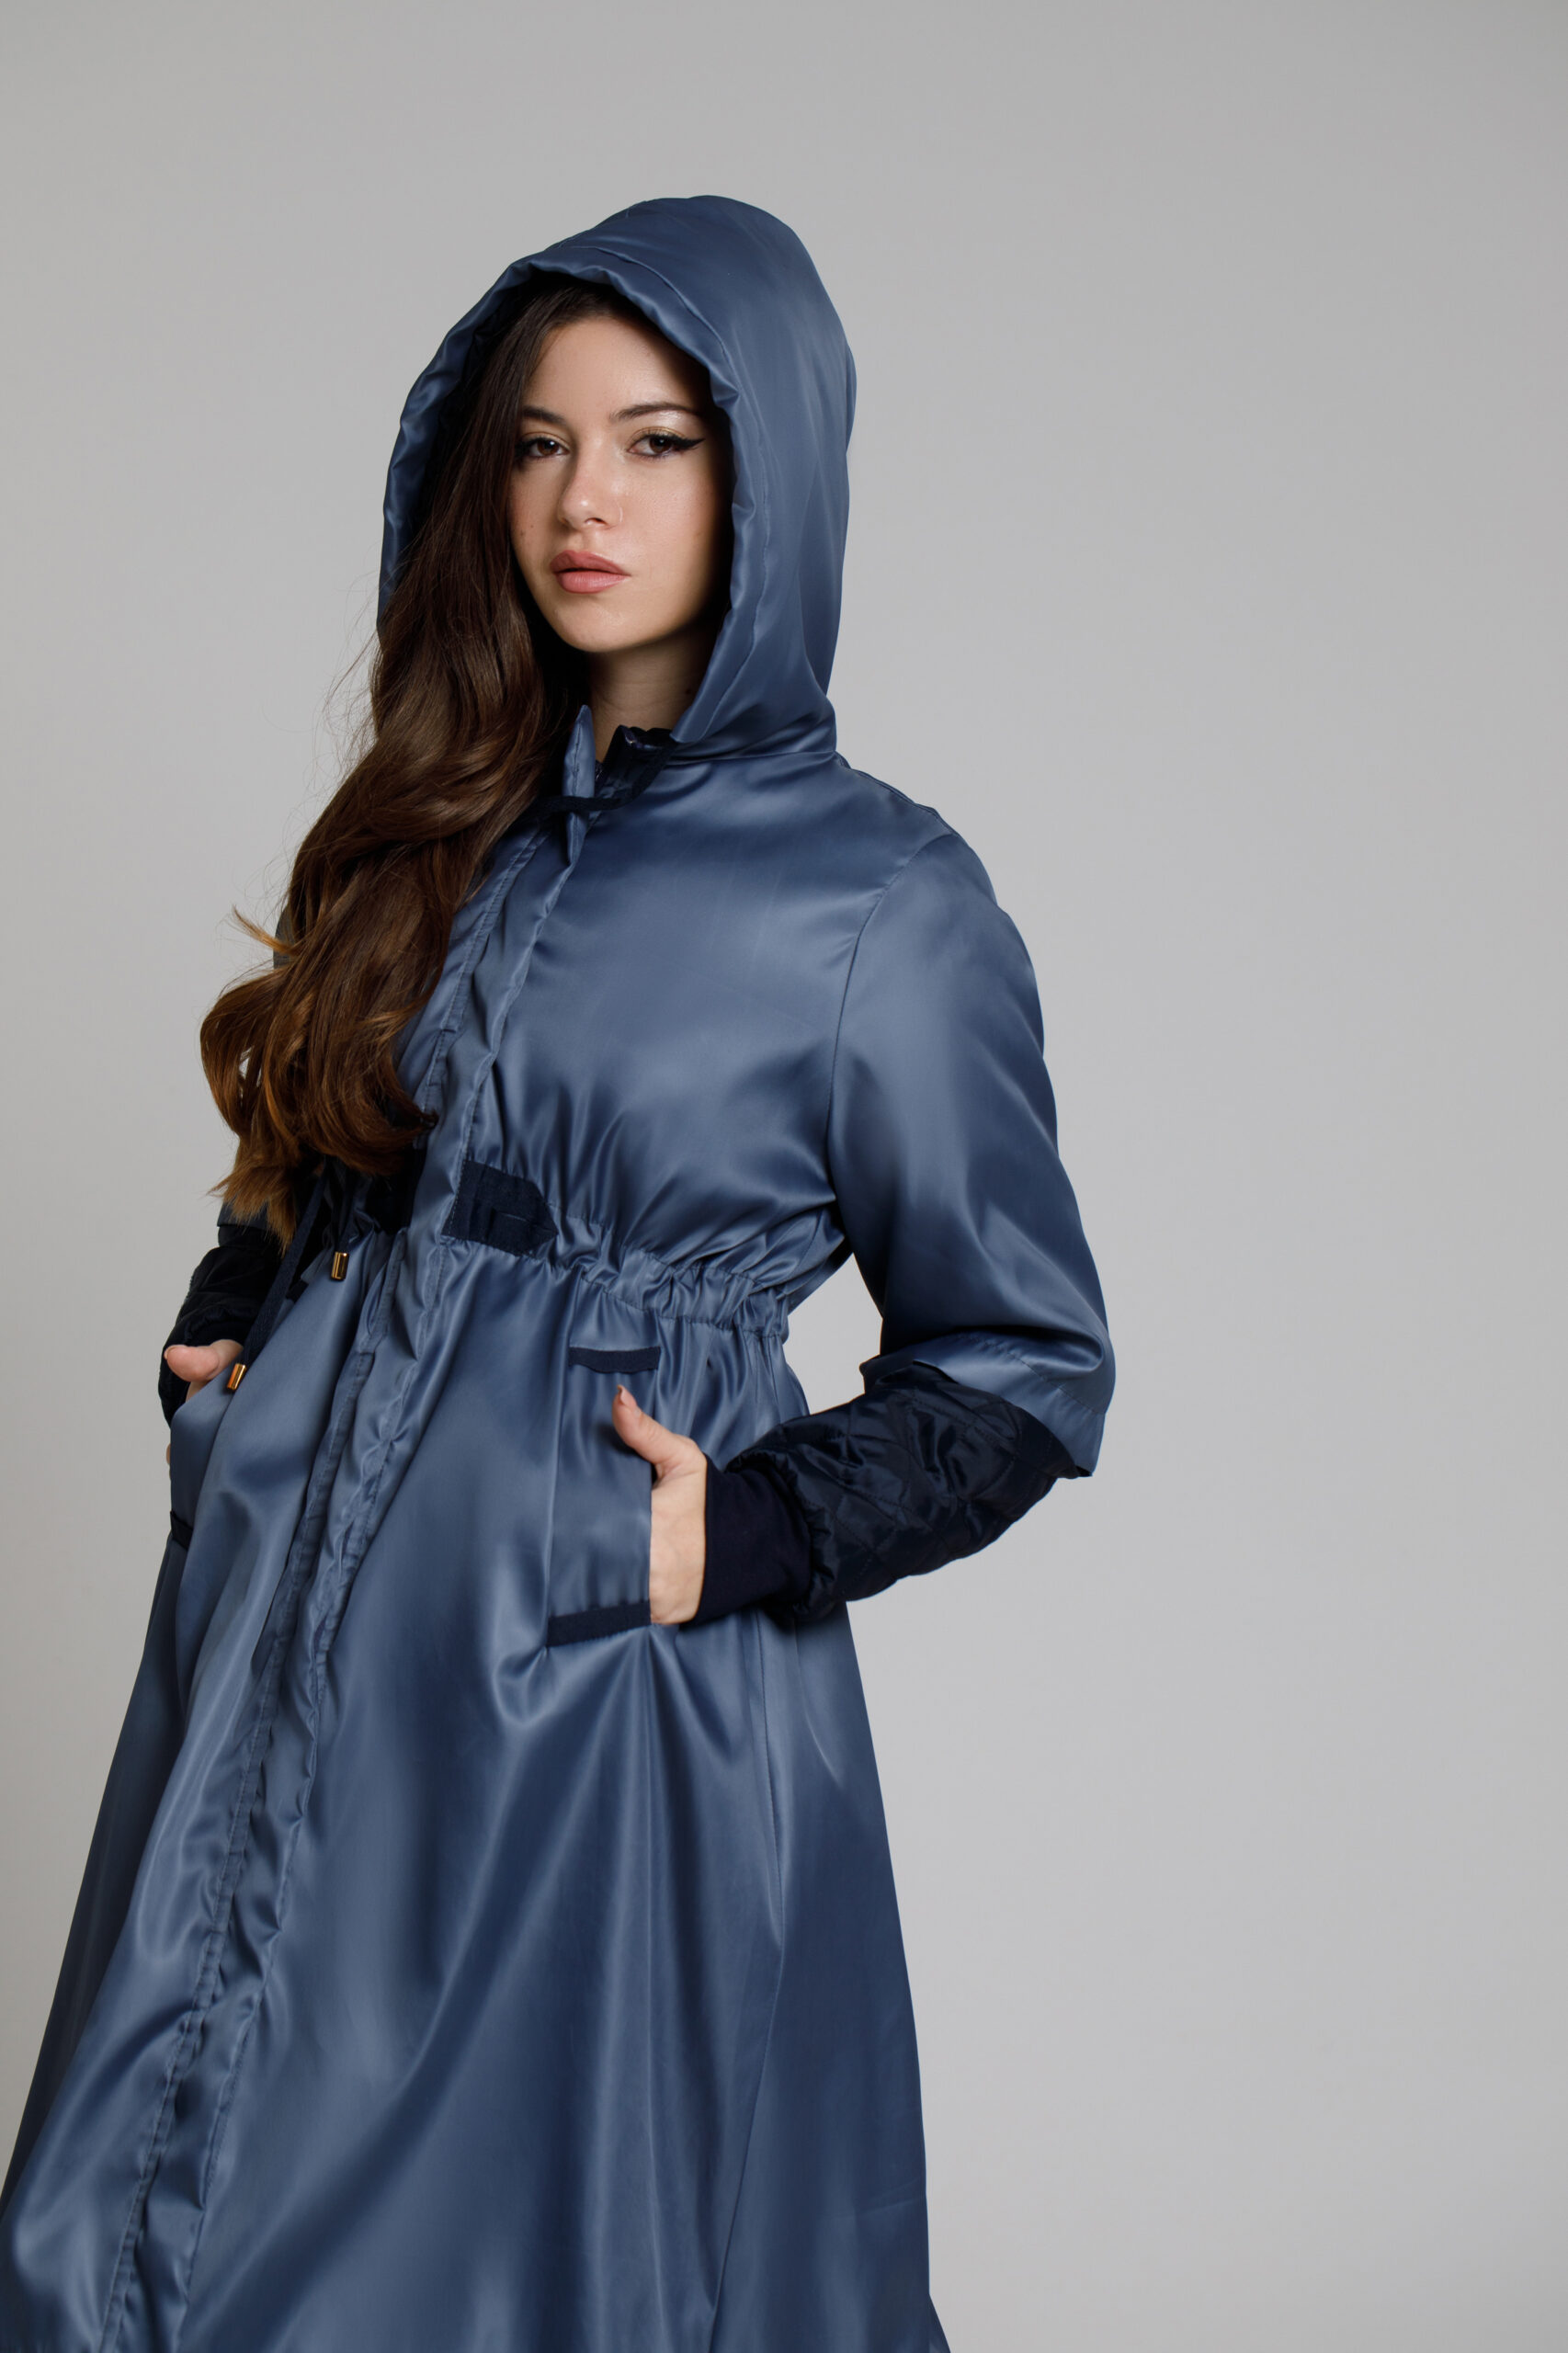 ZURY navy blue quilted overcoat. Natural fabrics, original design, handmade embroidery